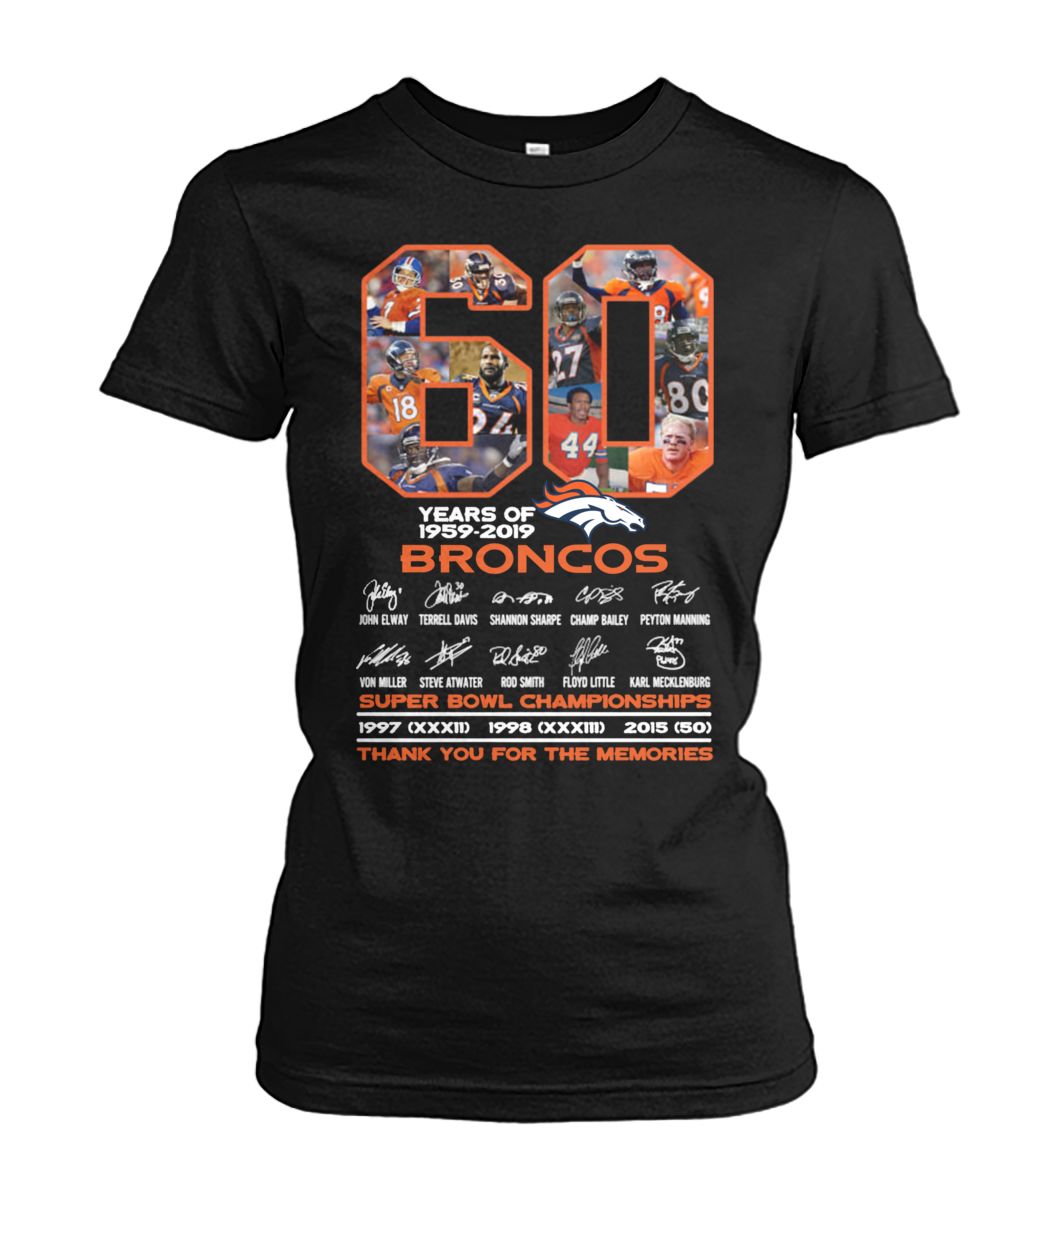 60 years of 1959-2019 broncos super bowl championships thank you for memories signatures women's crew tee